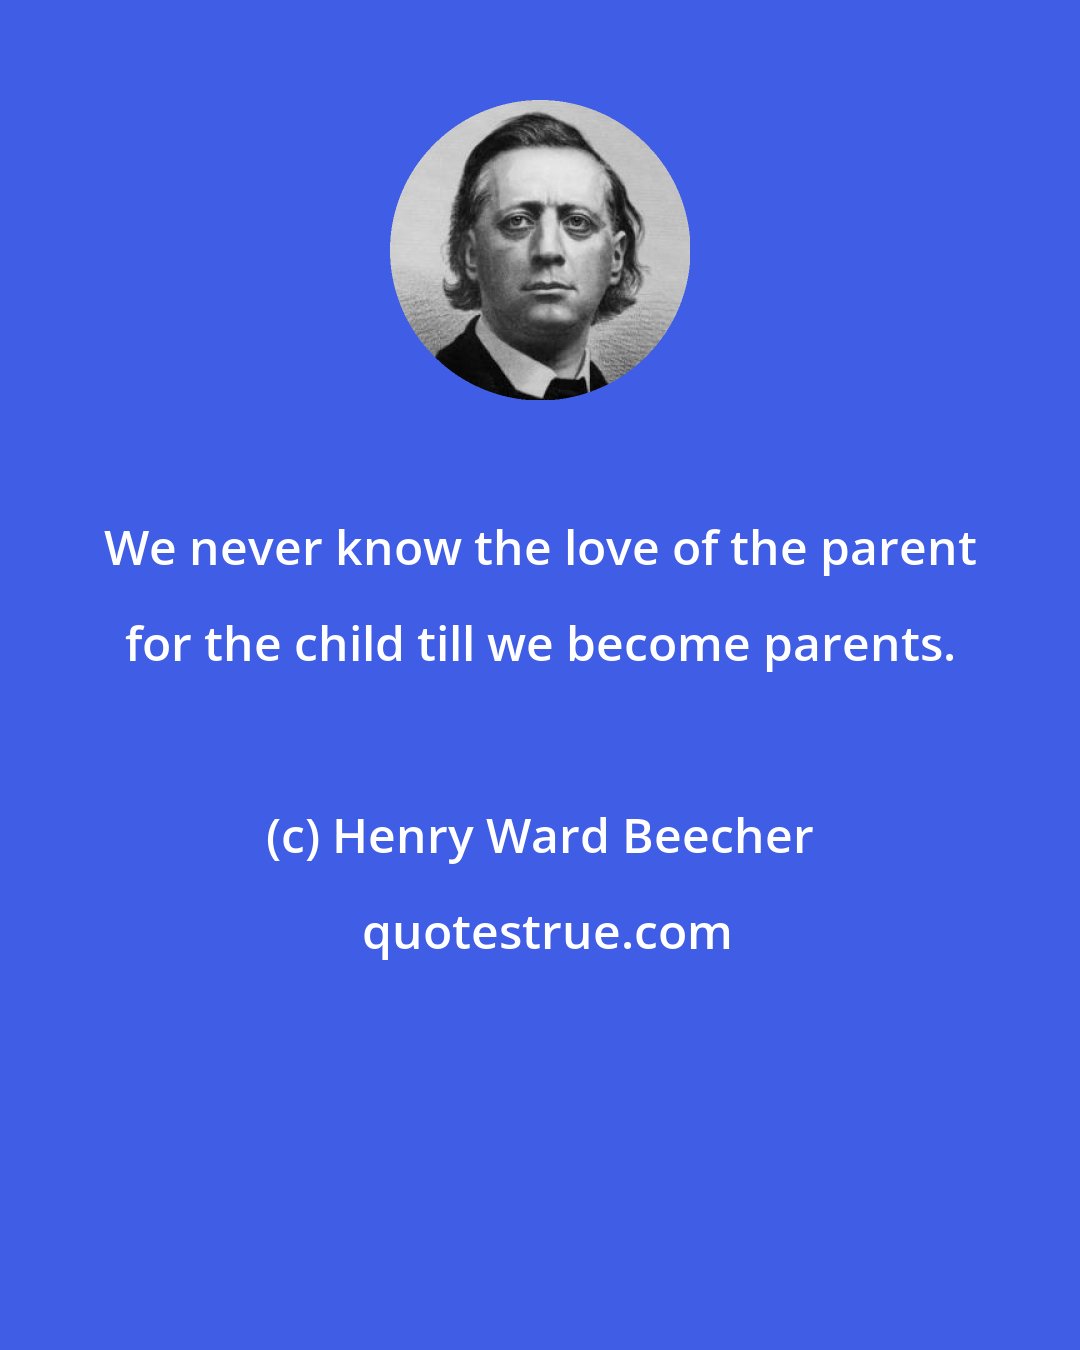 Henry Ward Beecher: We never know the love of the parent for the child till we become parents.